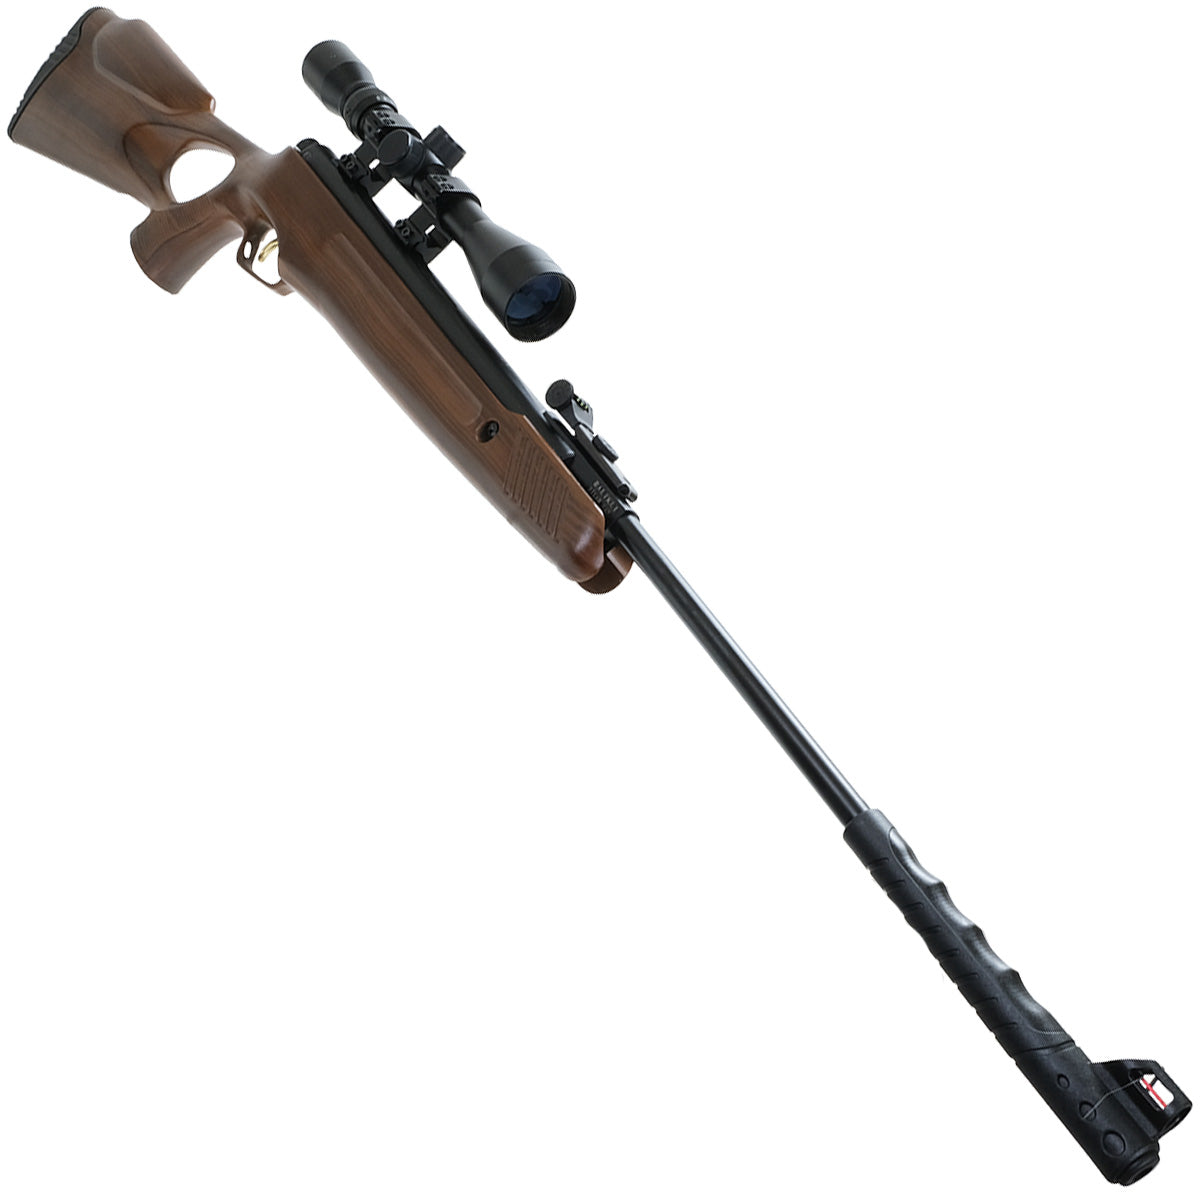 SALIX, TRIMEX ARMS TX05 BREAK BARREL SPRING AIR RIFLE WITH SYNTHETIC WOOD LOOK STOCK .22